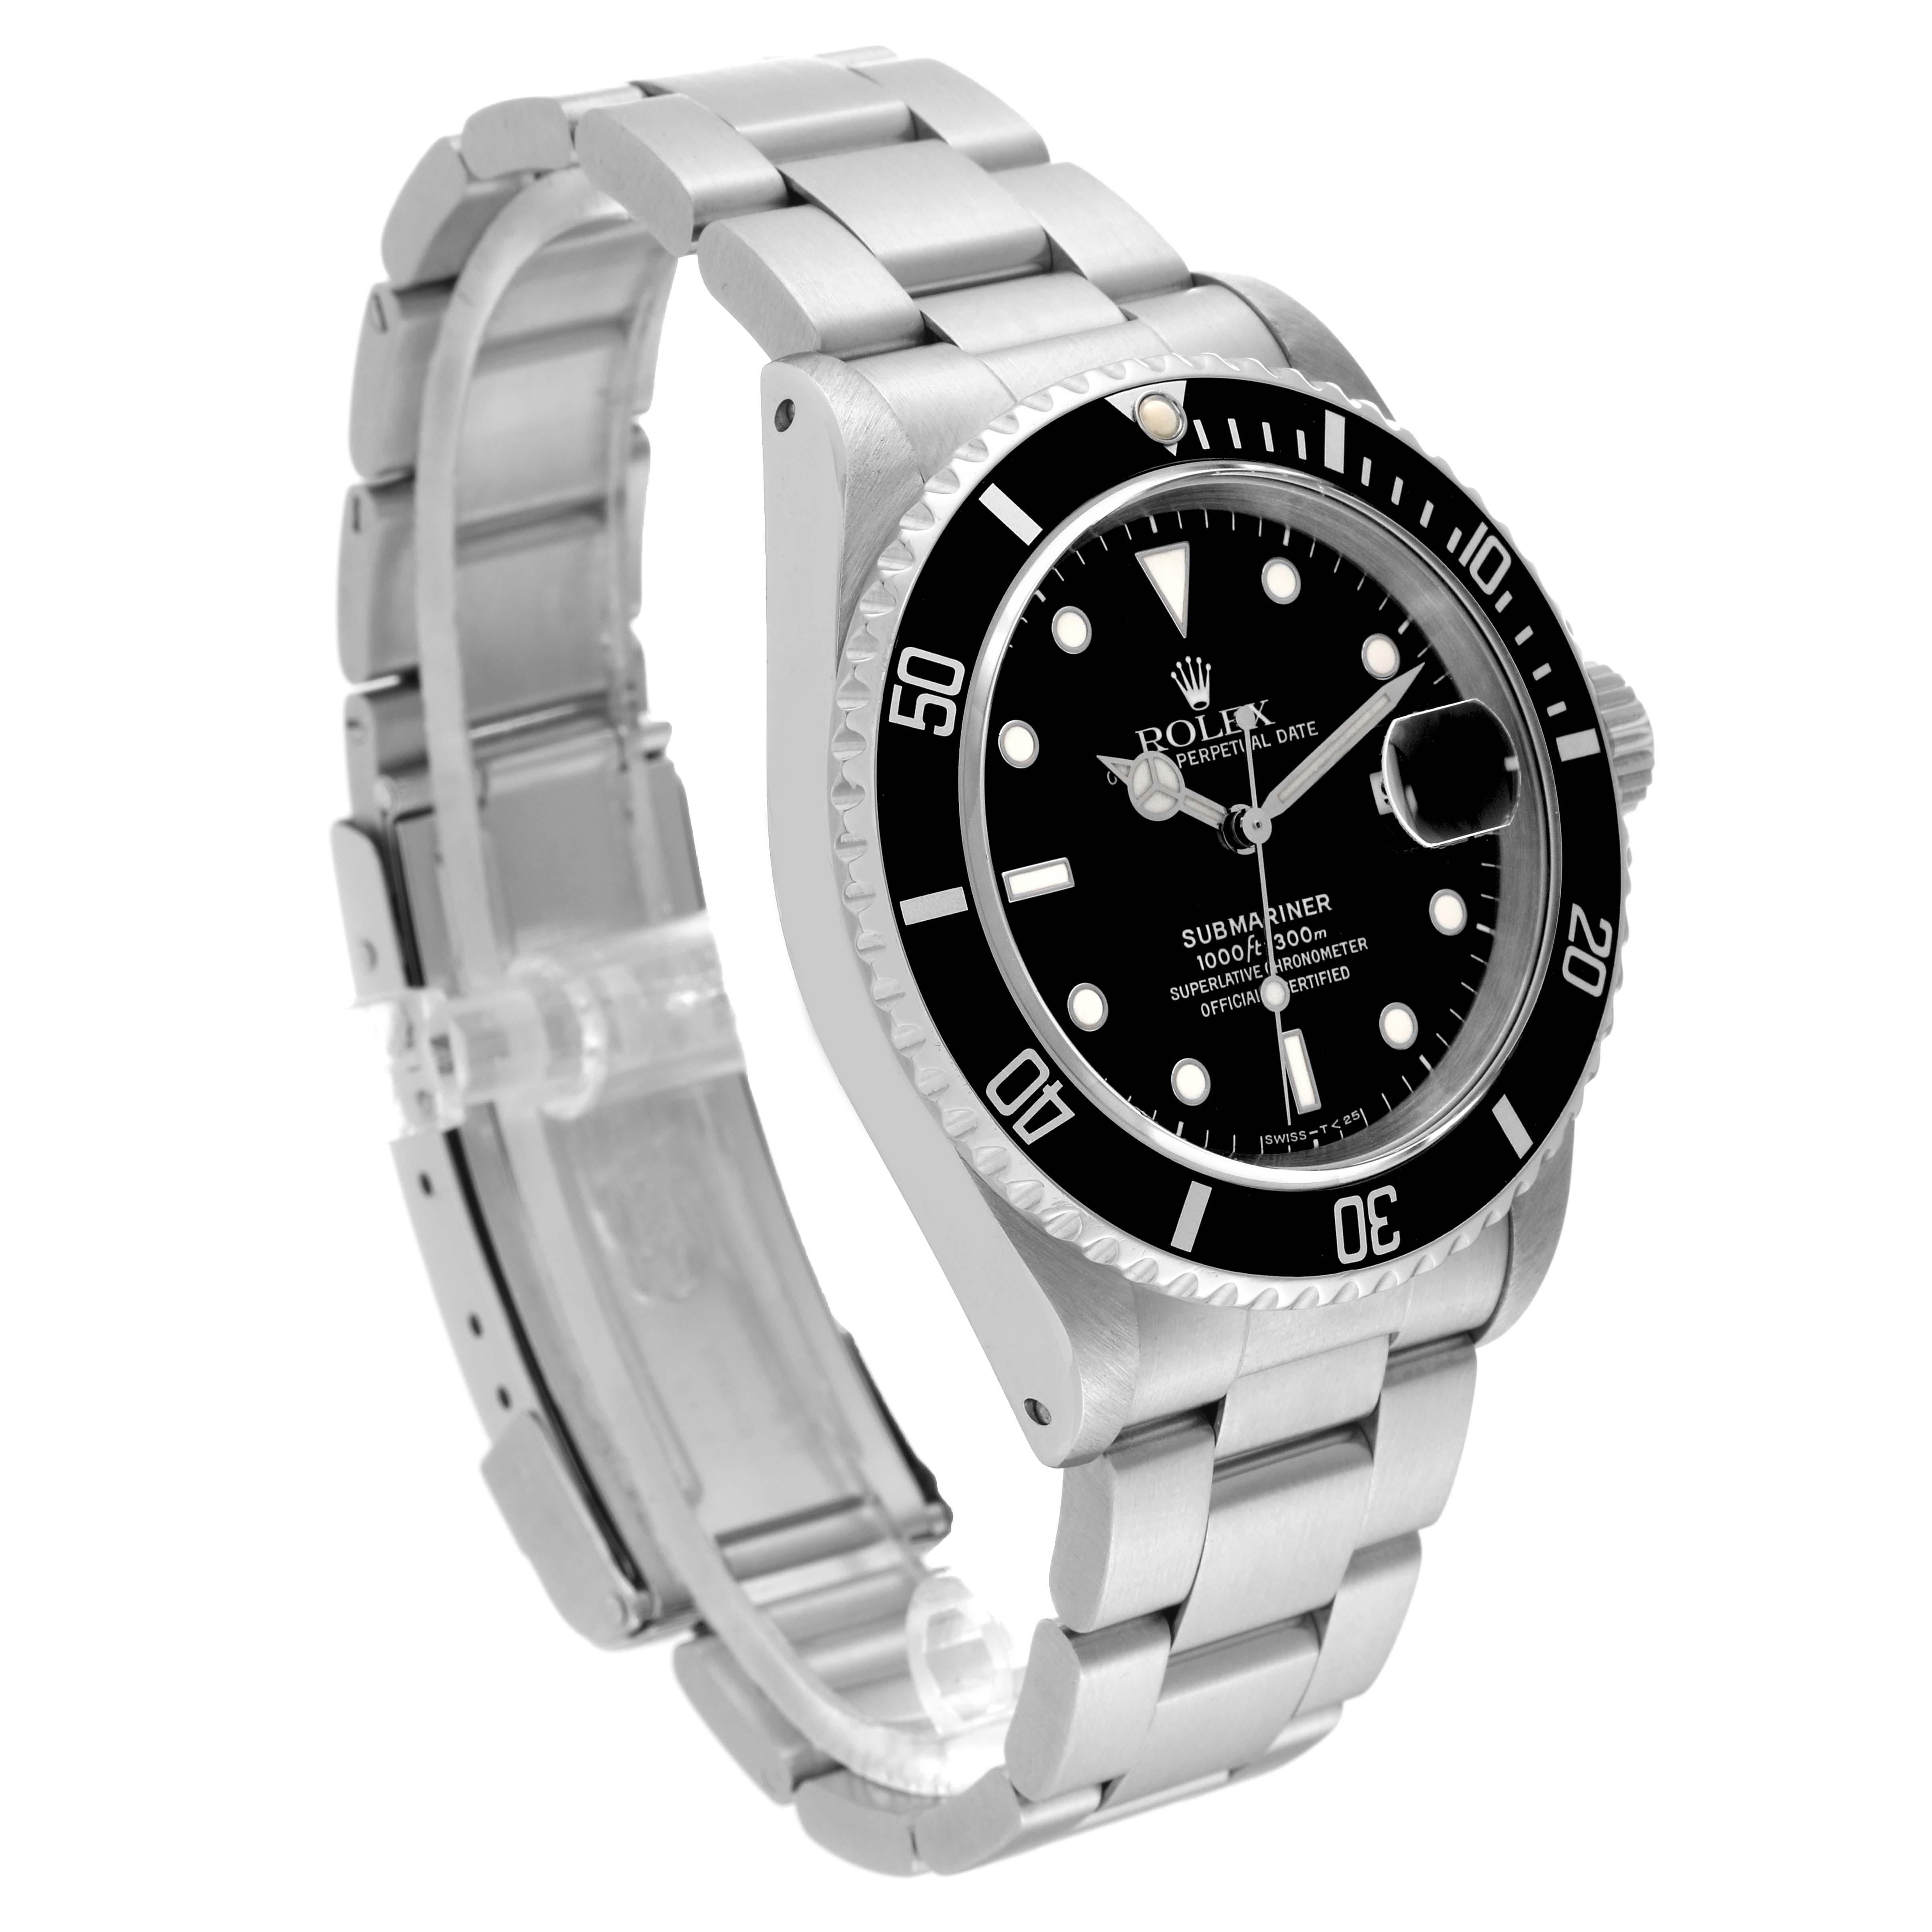 Rolex Submariner Date Black Dial Steel Mens Watch 16610 Box Papers 2